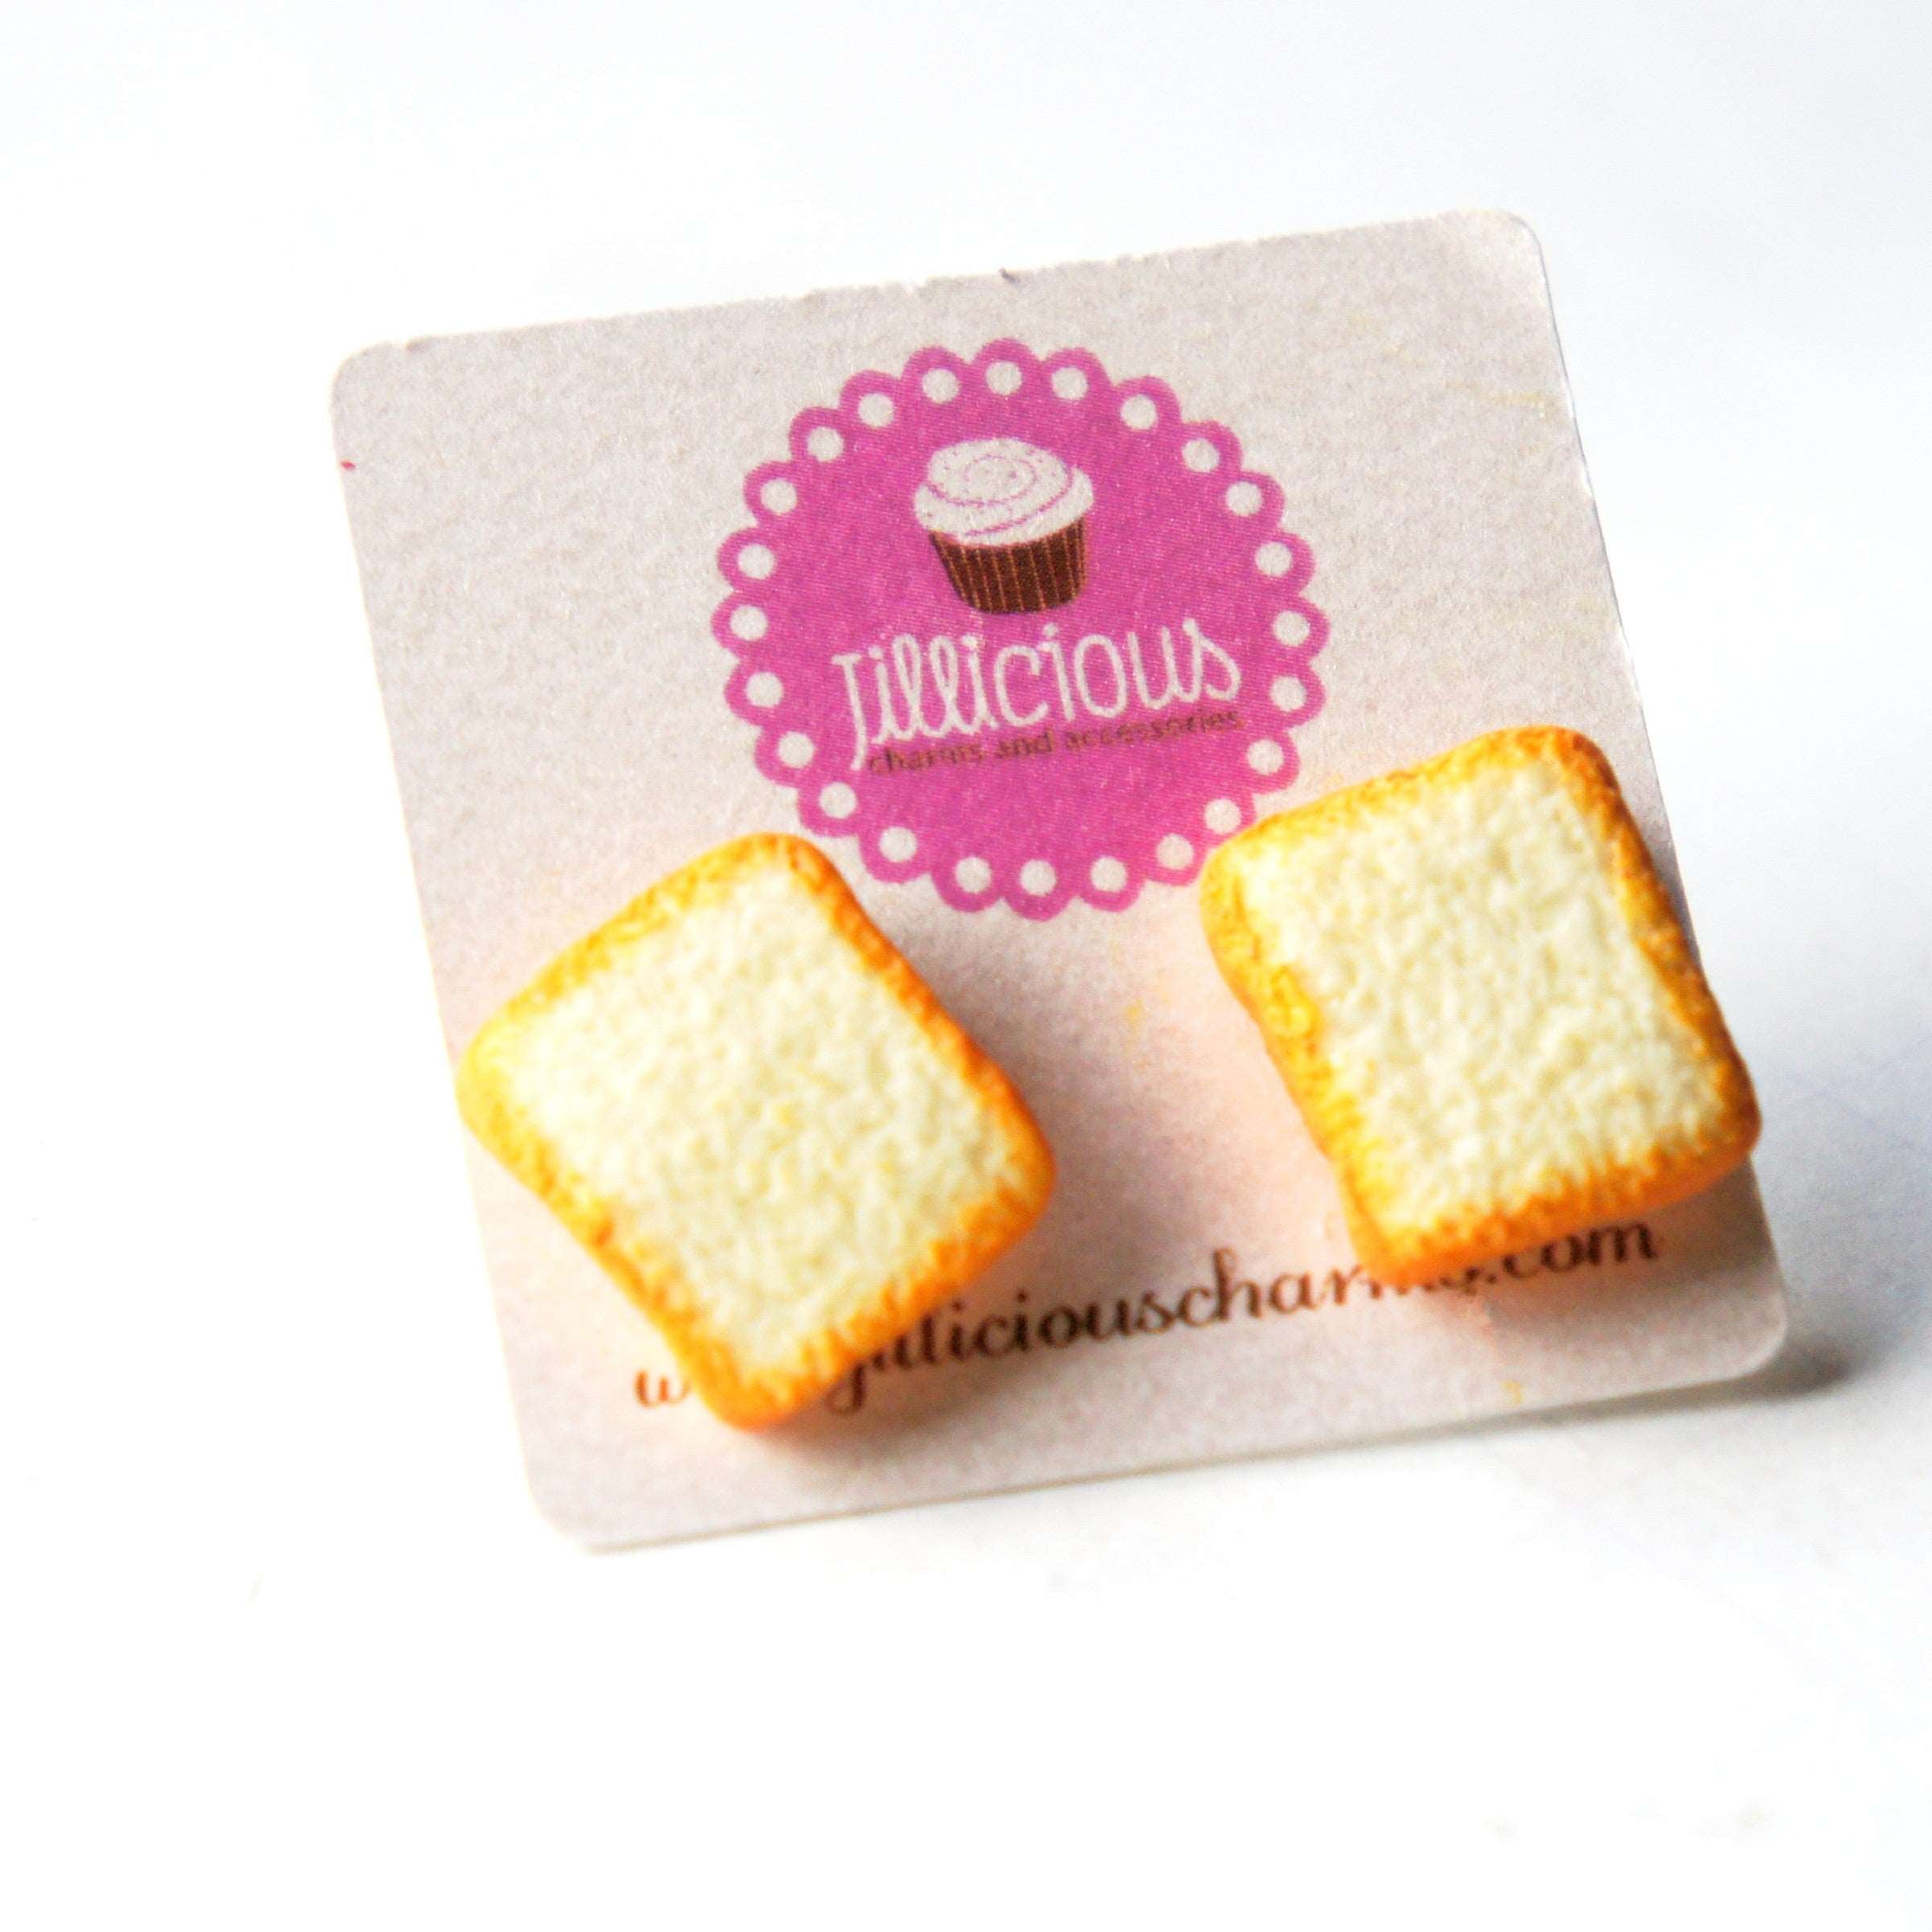 Bread Toast Stud Earrings - Jillicious charms and accessories